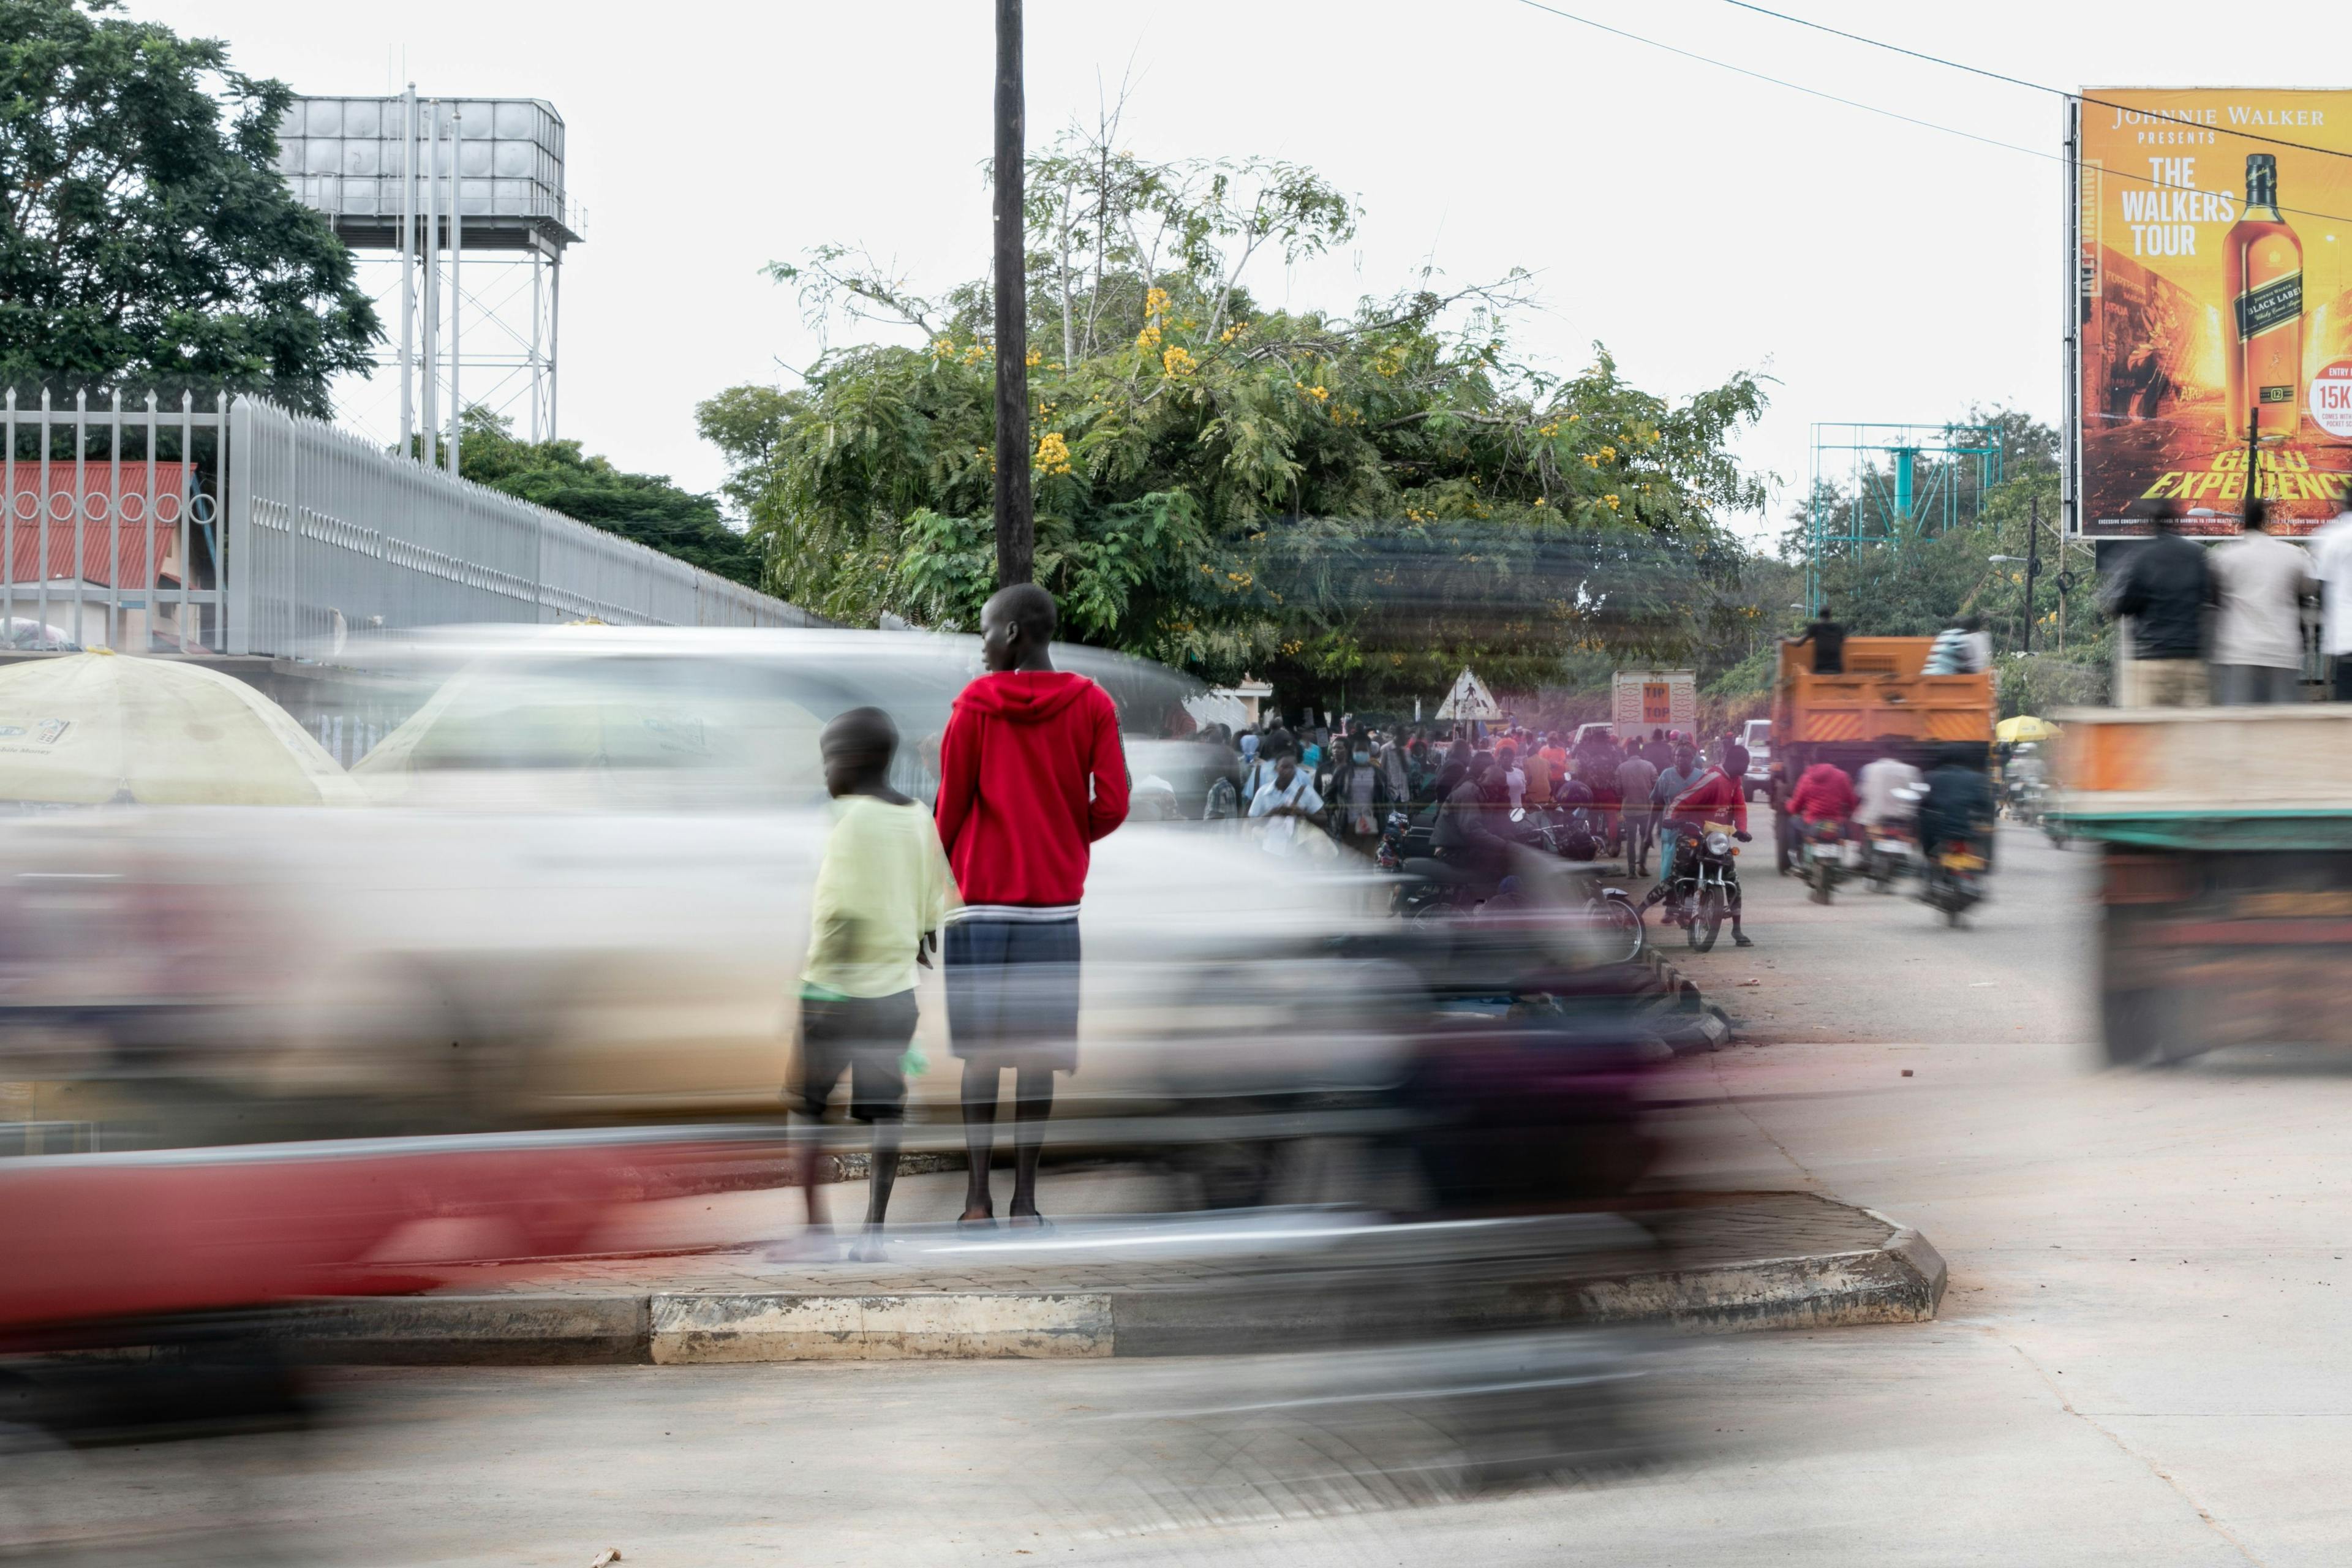 The city’s streets hum with activity as boda boda taxis, roadside vendors, and street hawkers go about their business. Cross-border trade and travel make border cities vibrant with opportunity, which will grow as climate mobility increases.